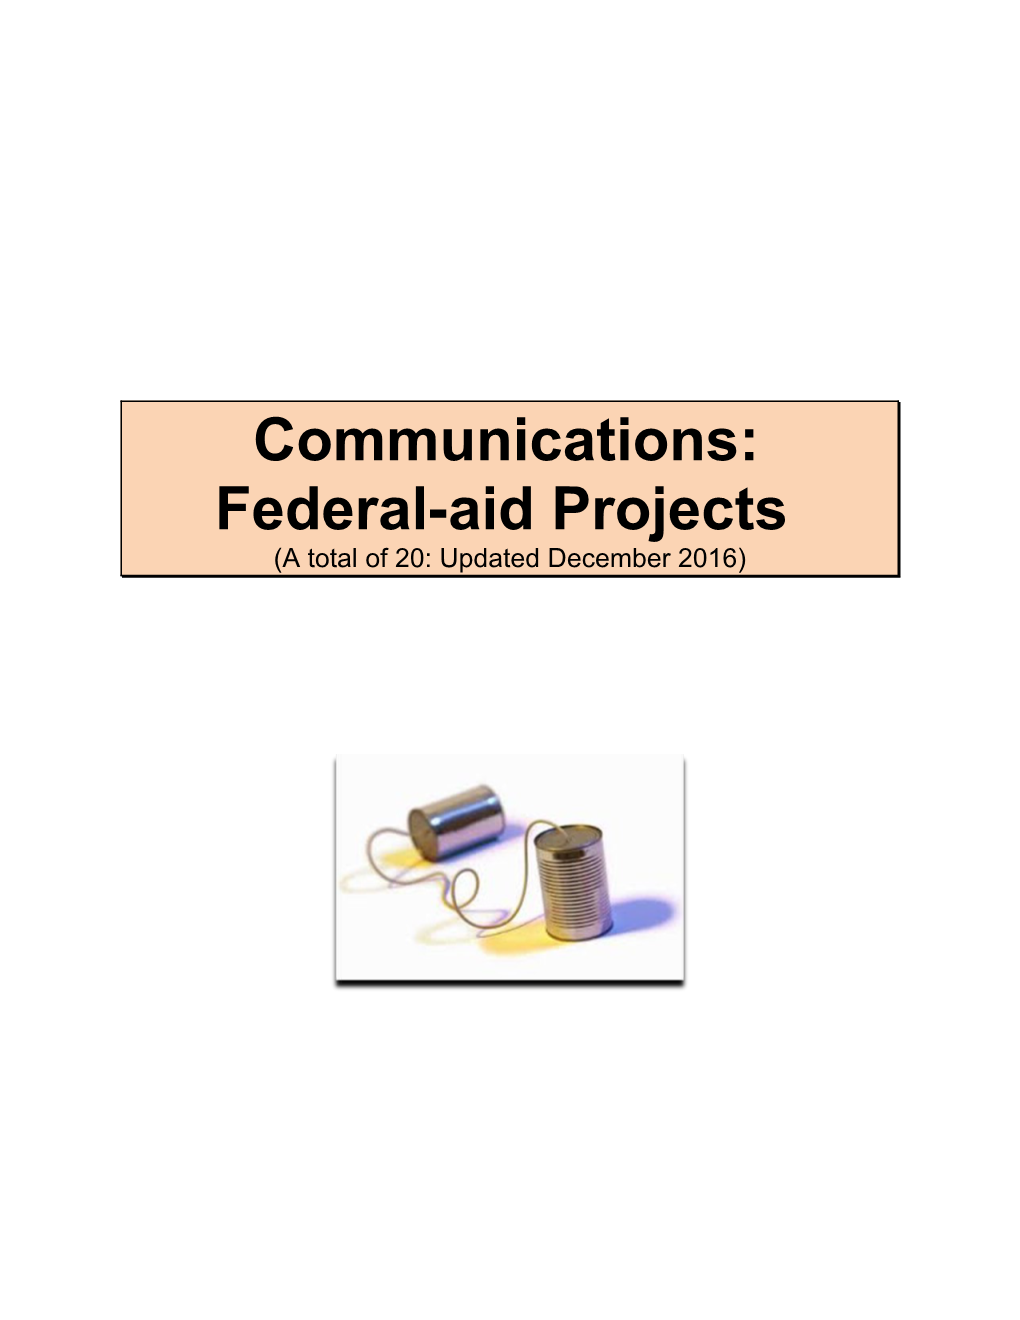 Communication 1: Request for Local Project Administration